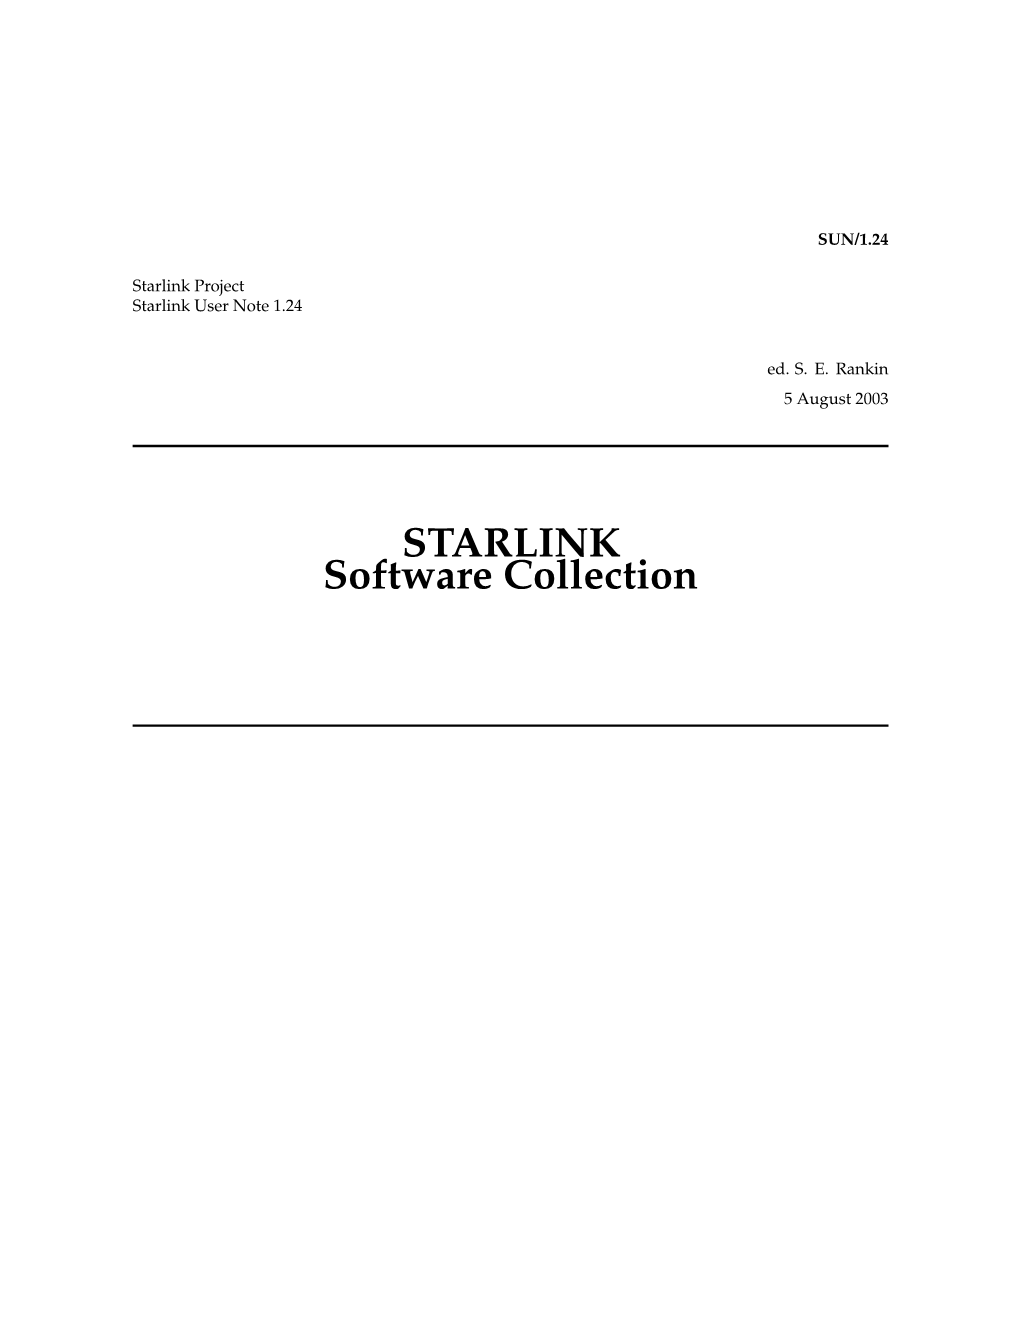 Starlinksoftware Collection